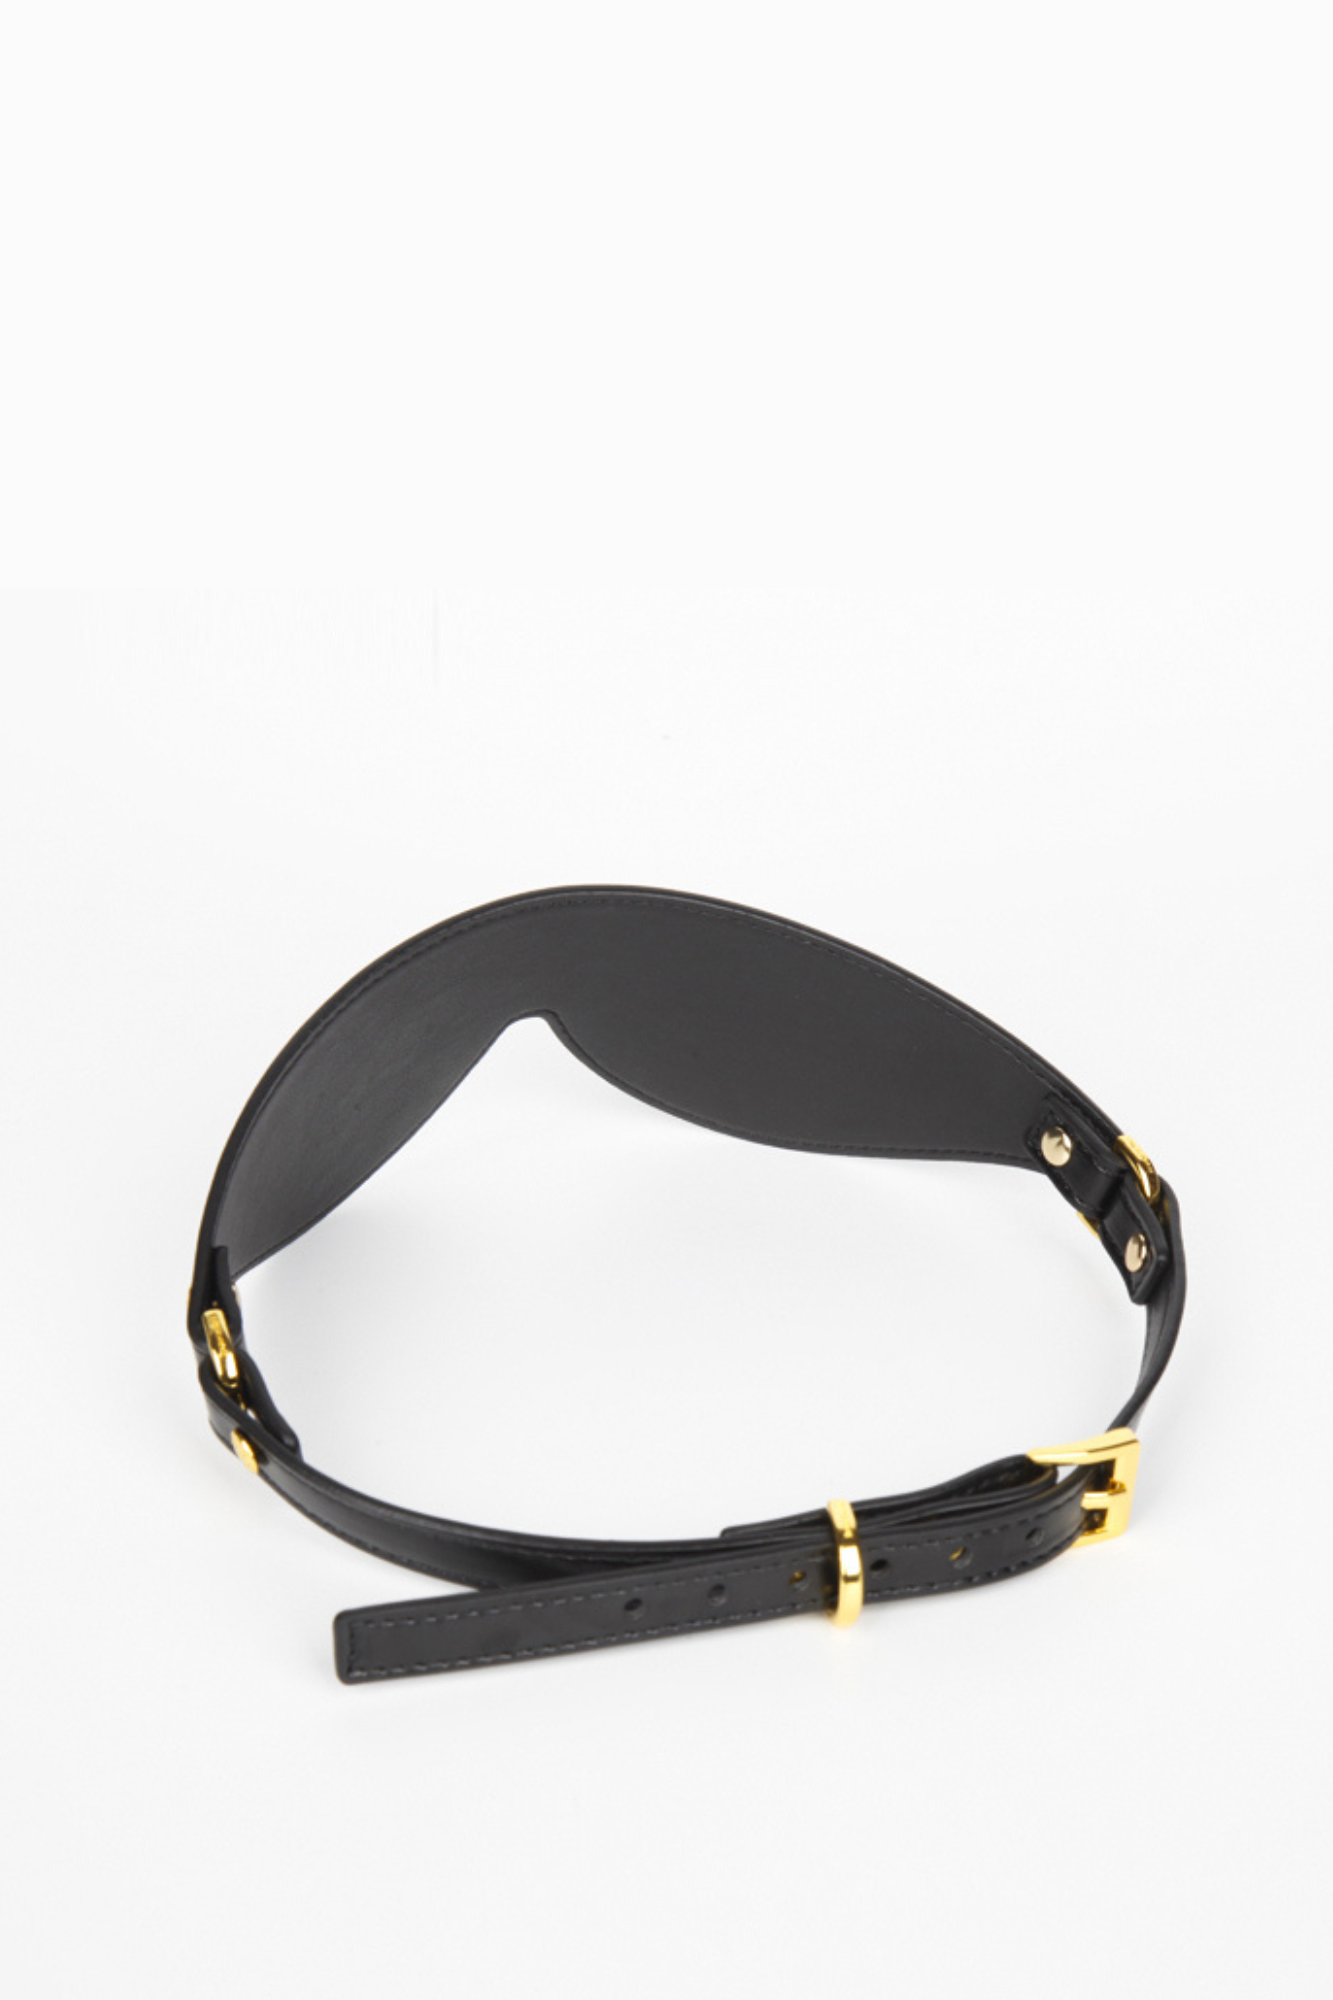 Vegan Black Leather Blindfold (also available in Pink!)